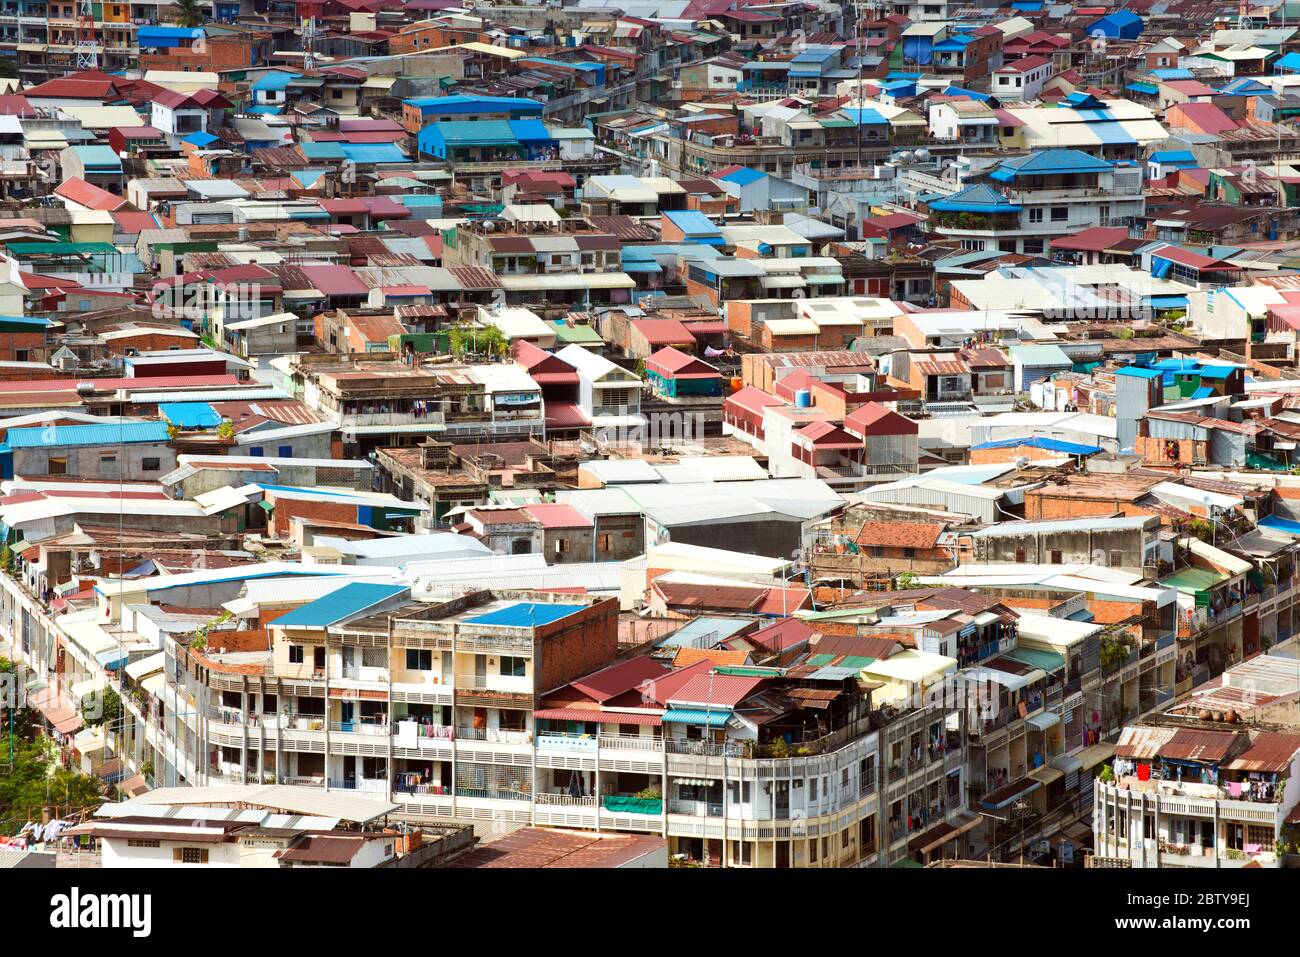 Colorful rooftops of Phnom Penh, capital city of Cambodia, Indochina, Southeast Asia, Asia Stock Photo